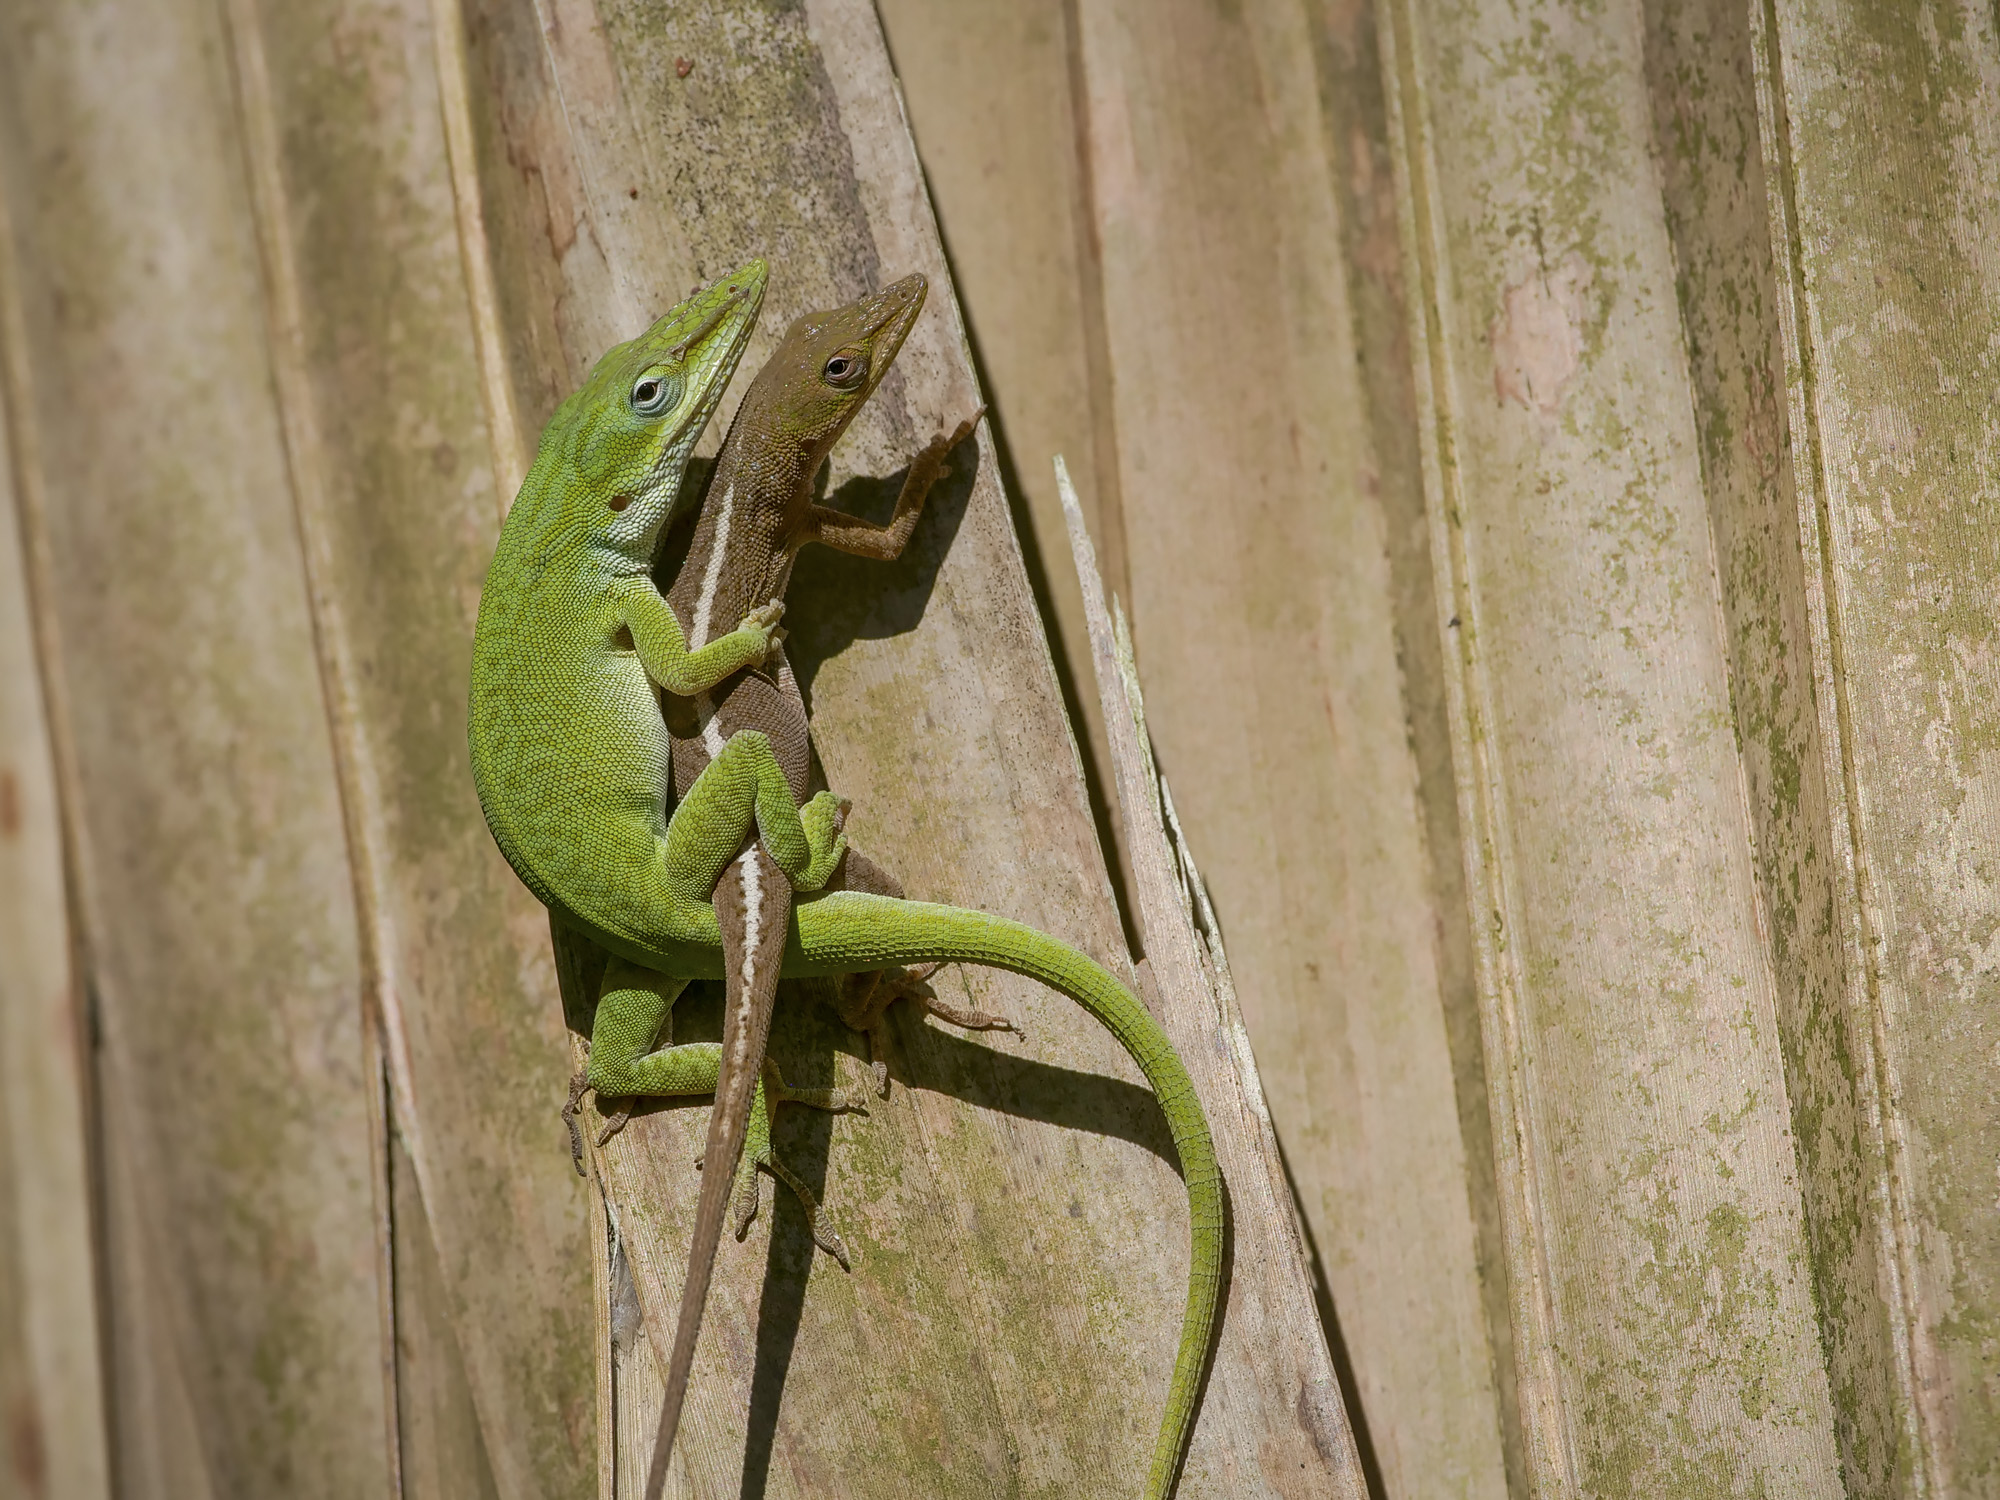 An American green anole male clinging to a female.